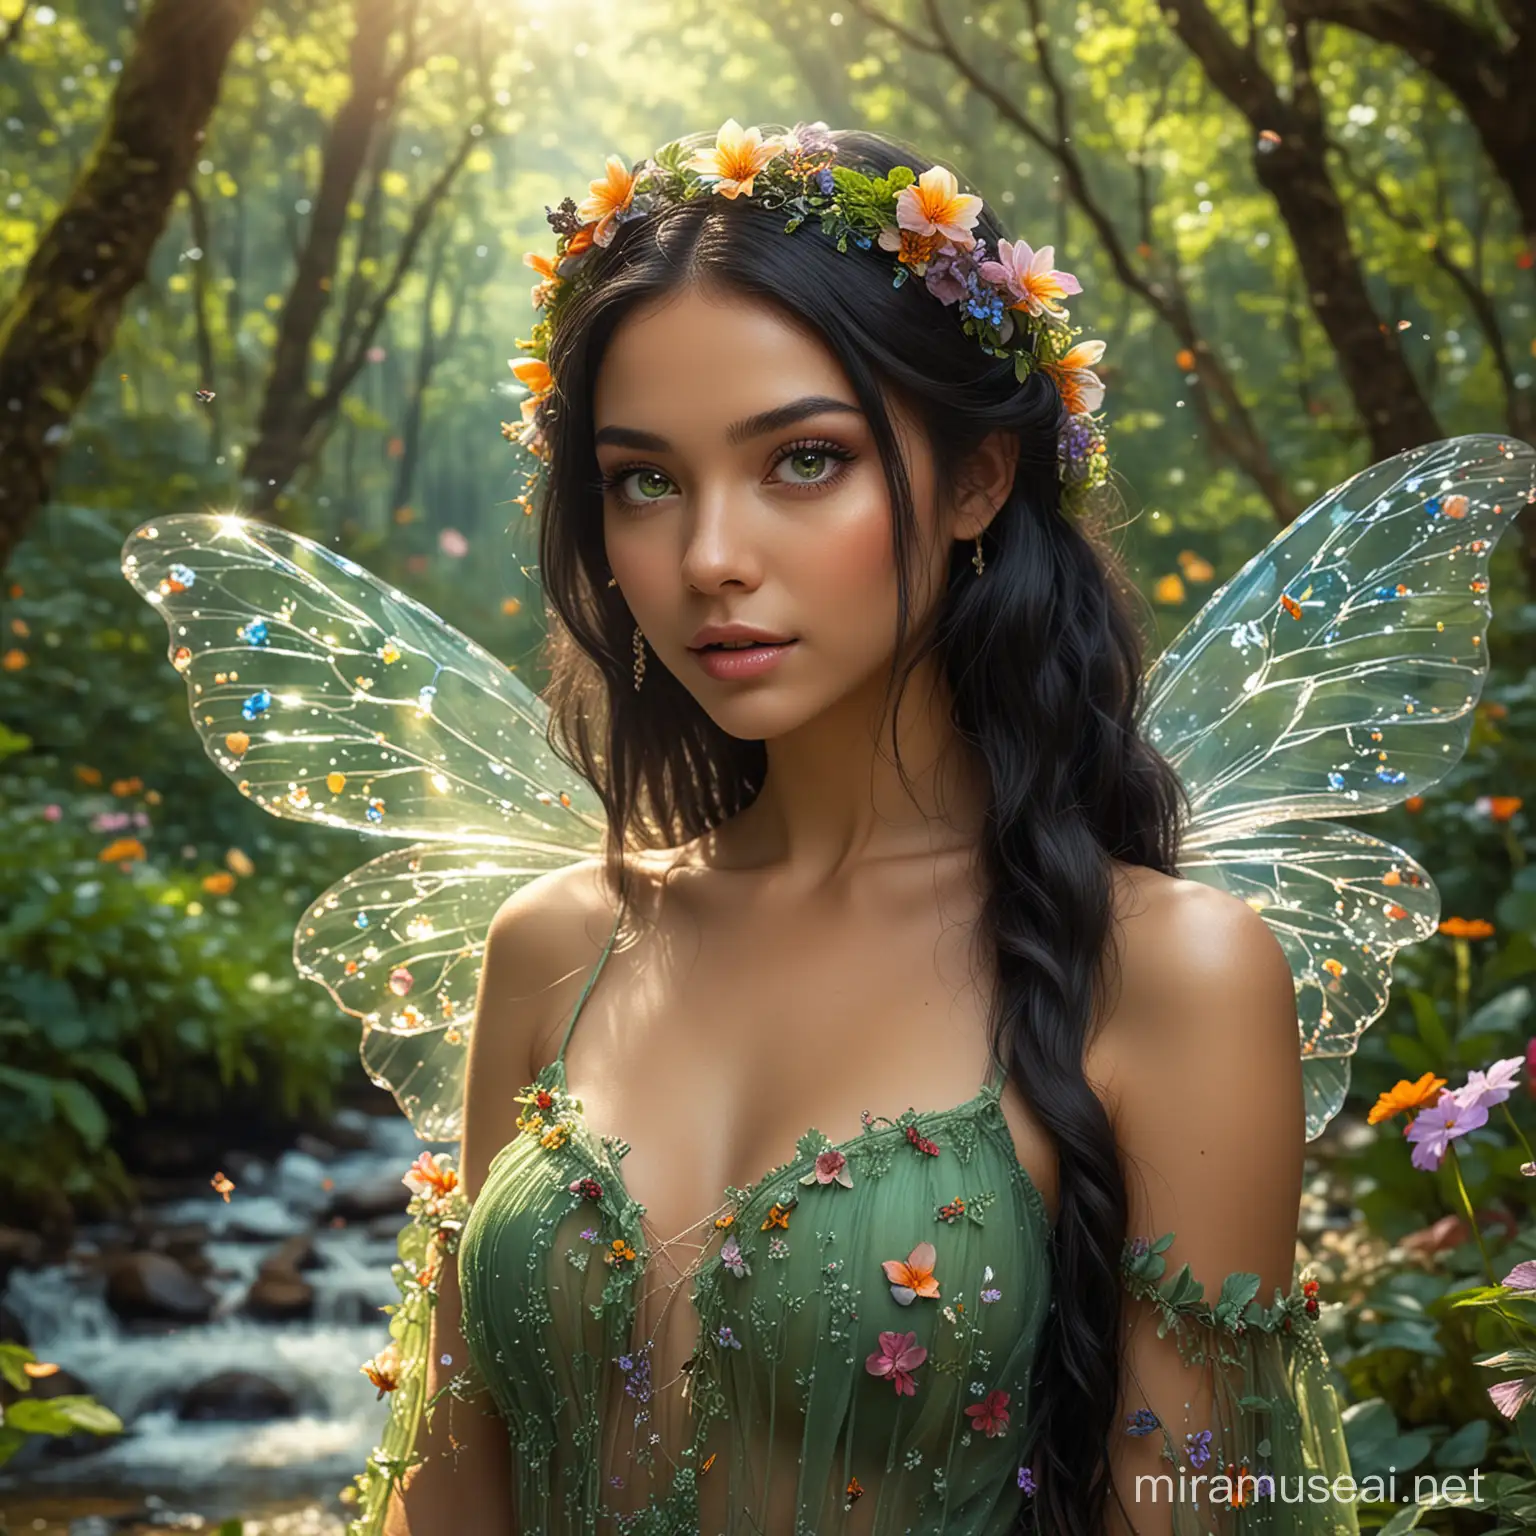 Enchanting Fairy with Black Hair and Transparent Wings Amidst Colorful Forest and Butterflies